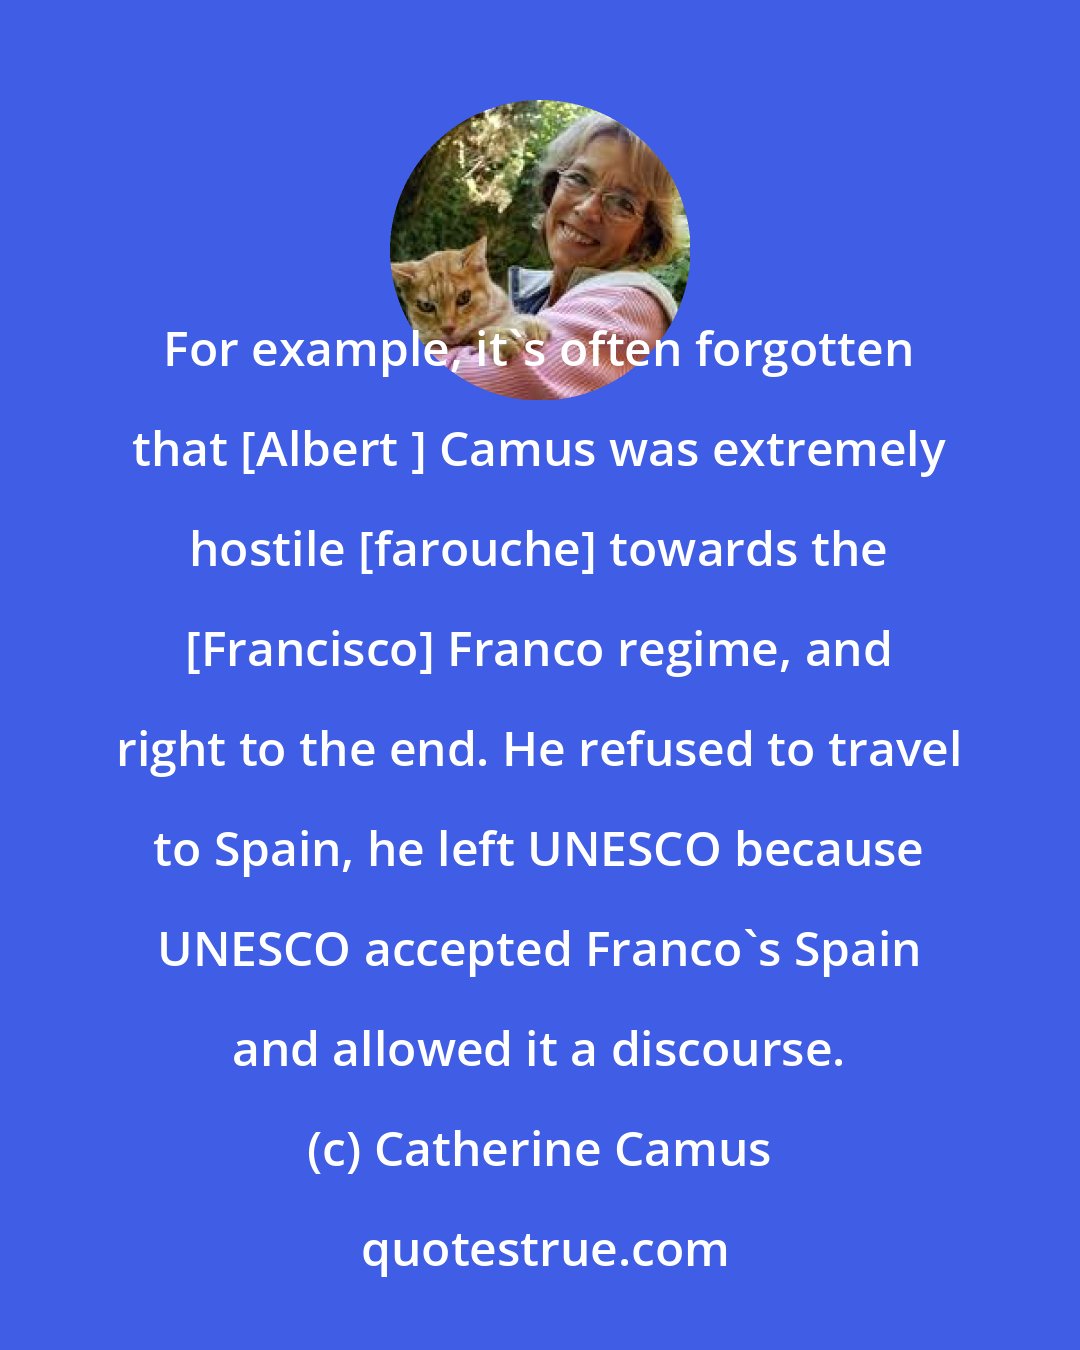 Catherine Camus: For example, it's often forgotten that [Albert ] Camus was extremely hostile [farouche] towards the [Francisco] Franco regime, and right to the end. He refused to travel to Spain, he left UNESCO because UNESCO accepted Franco's Spain and allowed it a discourse.